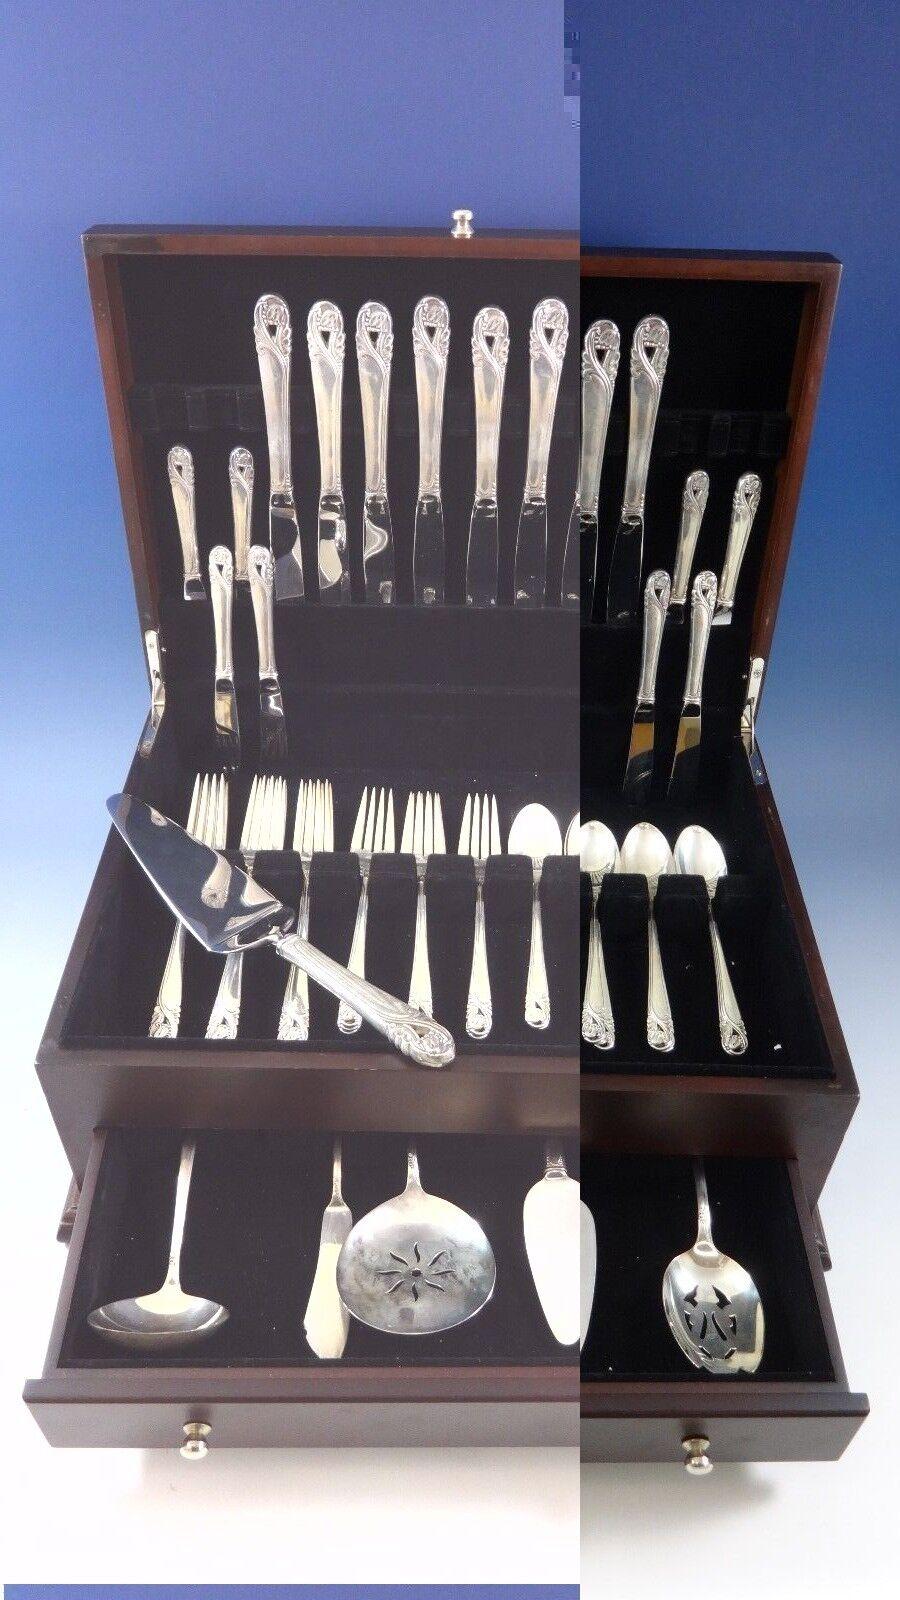 SPRING GLORY BY INTERNATIONAL sterling silver flatware set - 46 pieces. This set includes:

8 KNIVES, 9 1/4